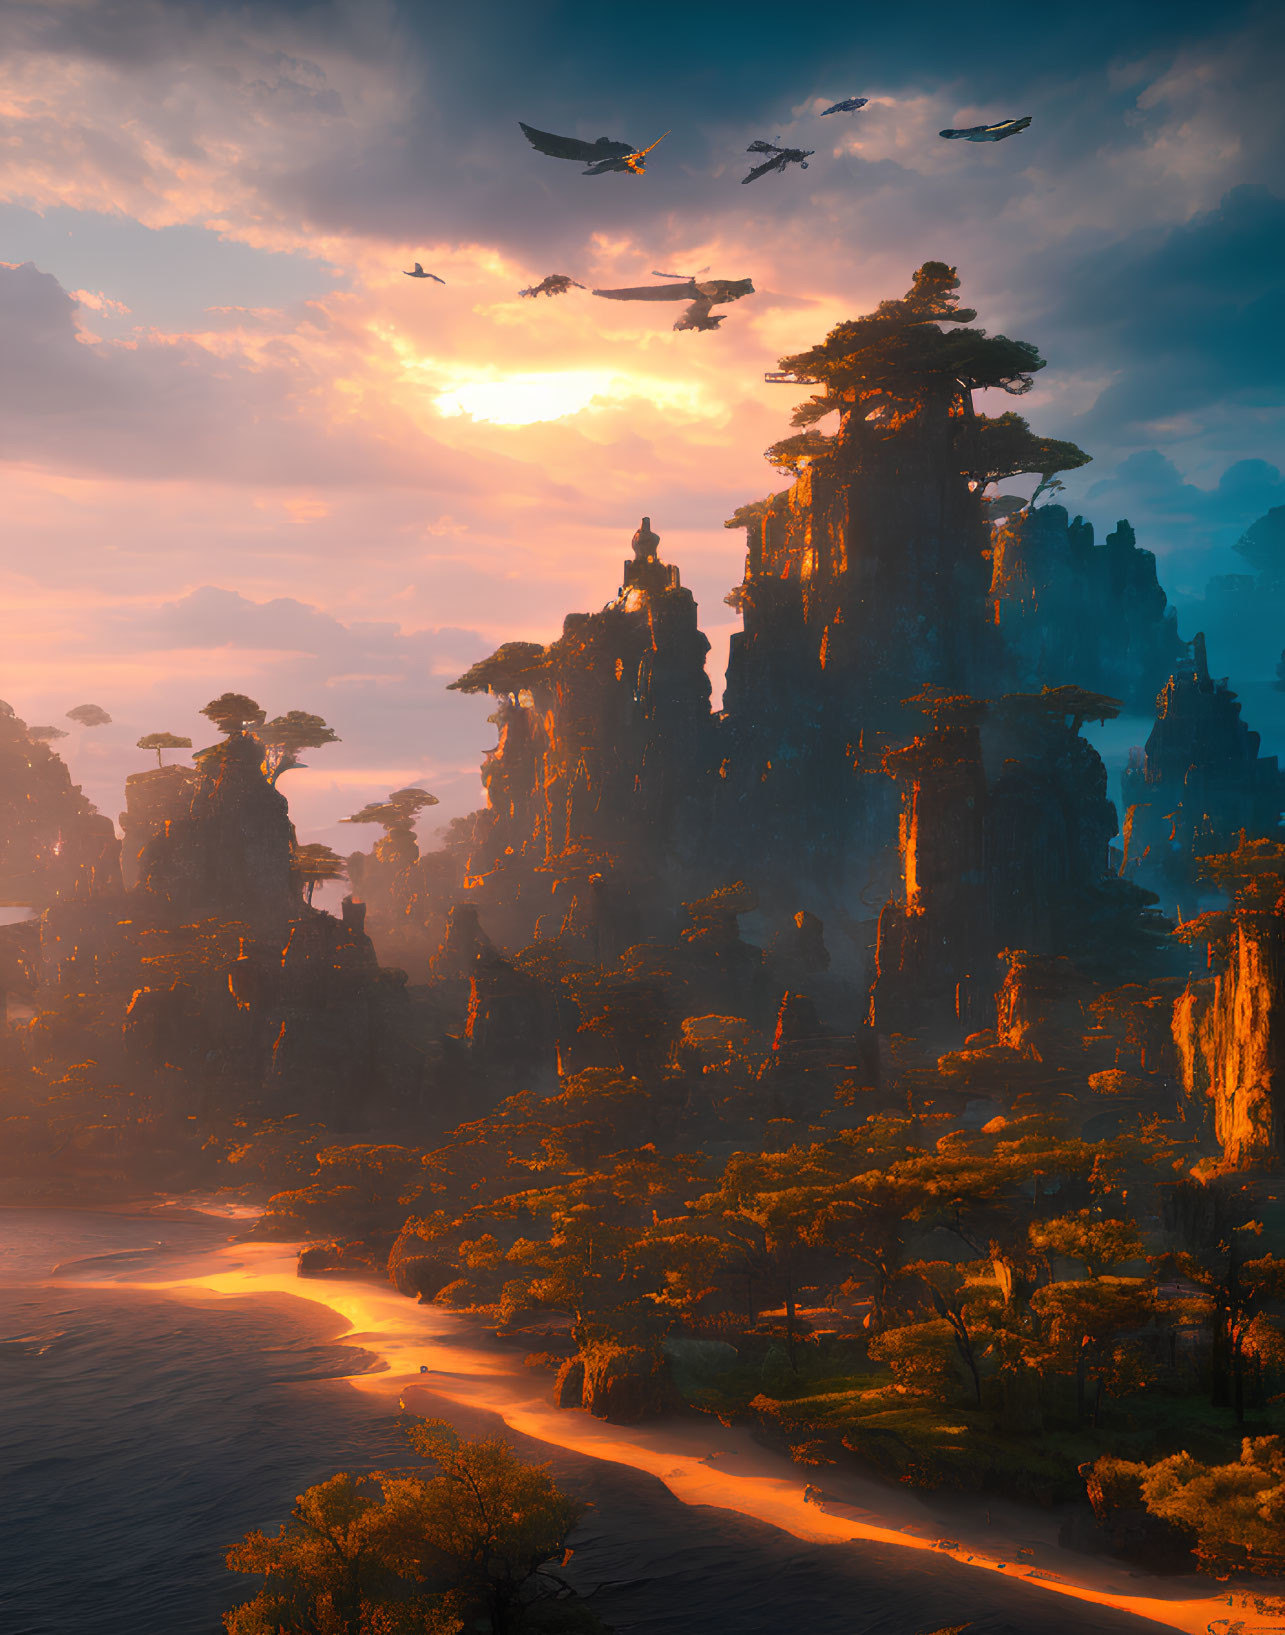 Majestic sunset over mystical landscape with rock formations & flying creatures